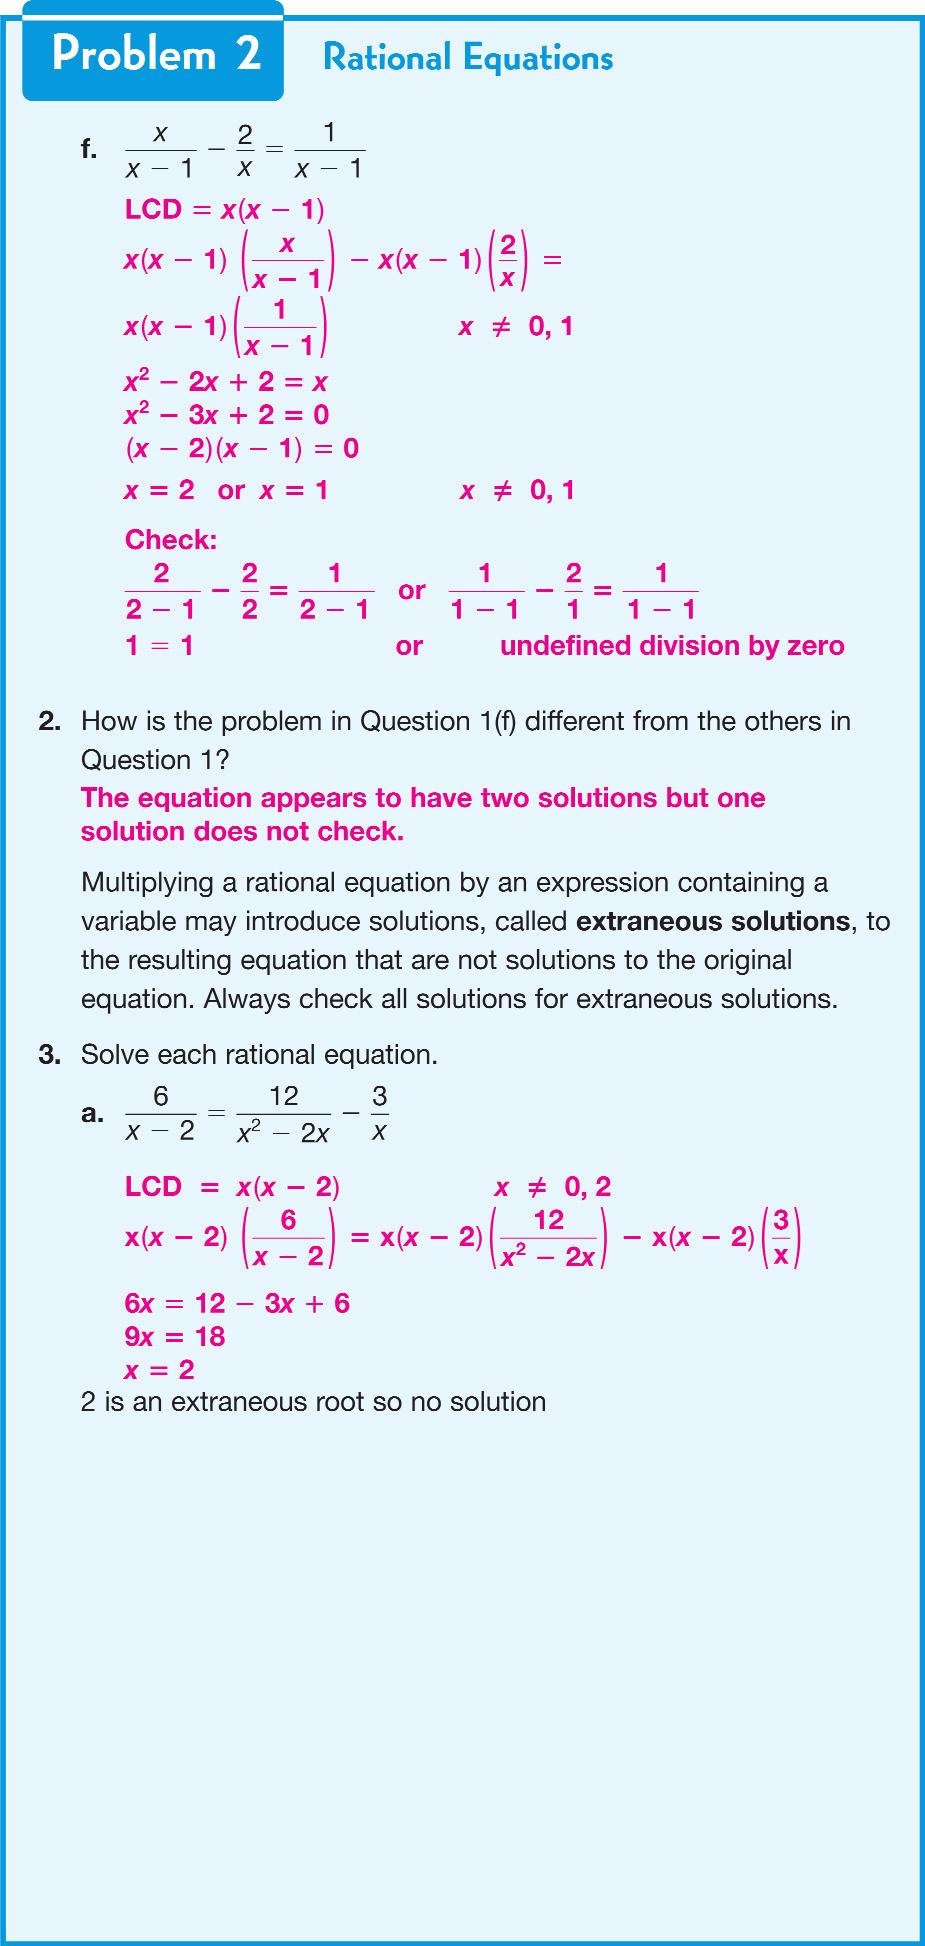 Explore Together Note Extraneous solutions are explained as solutions that result from multiplying a rational equation by an expression containing a variable and that are not